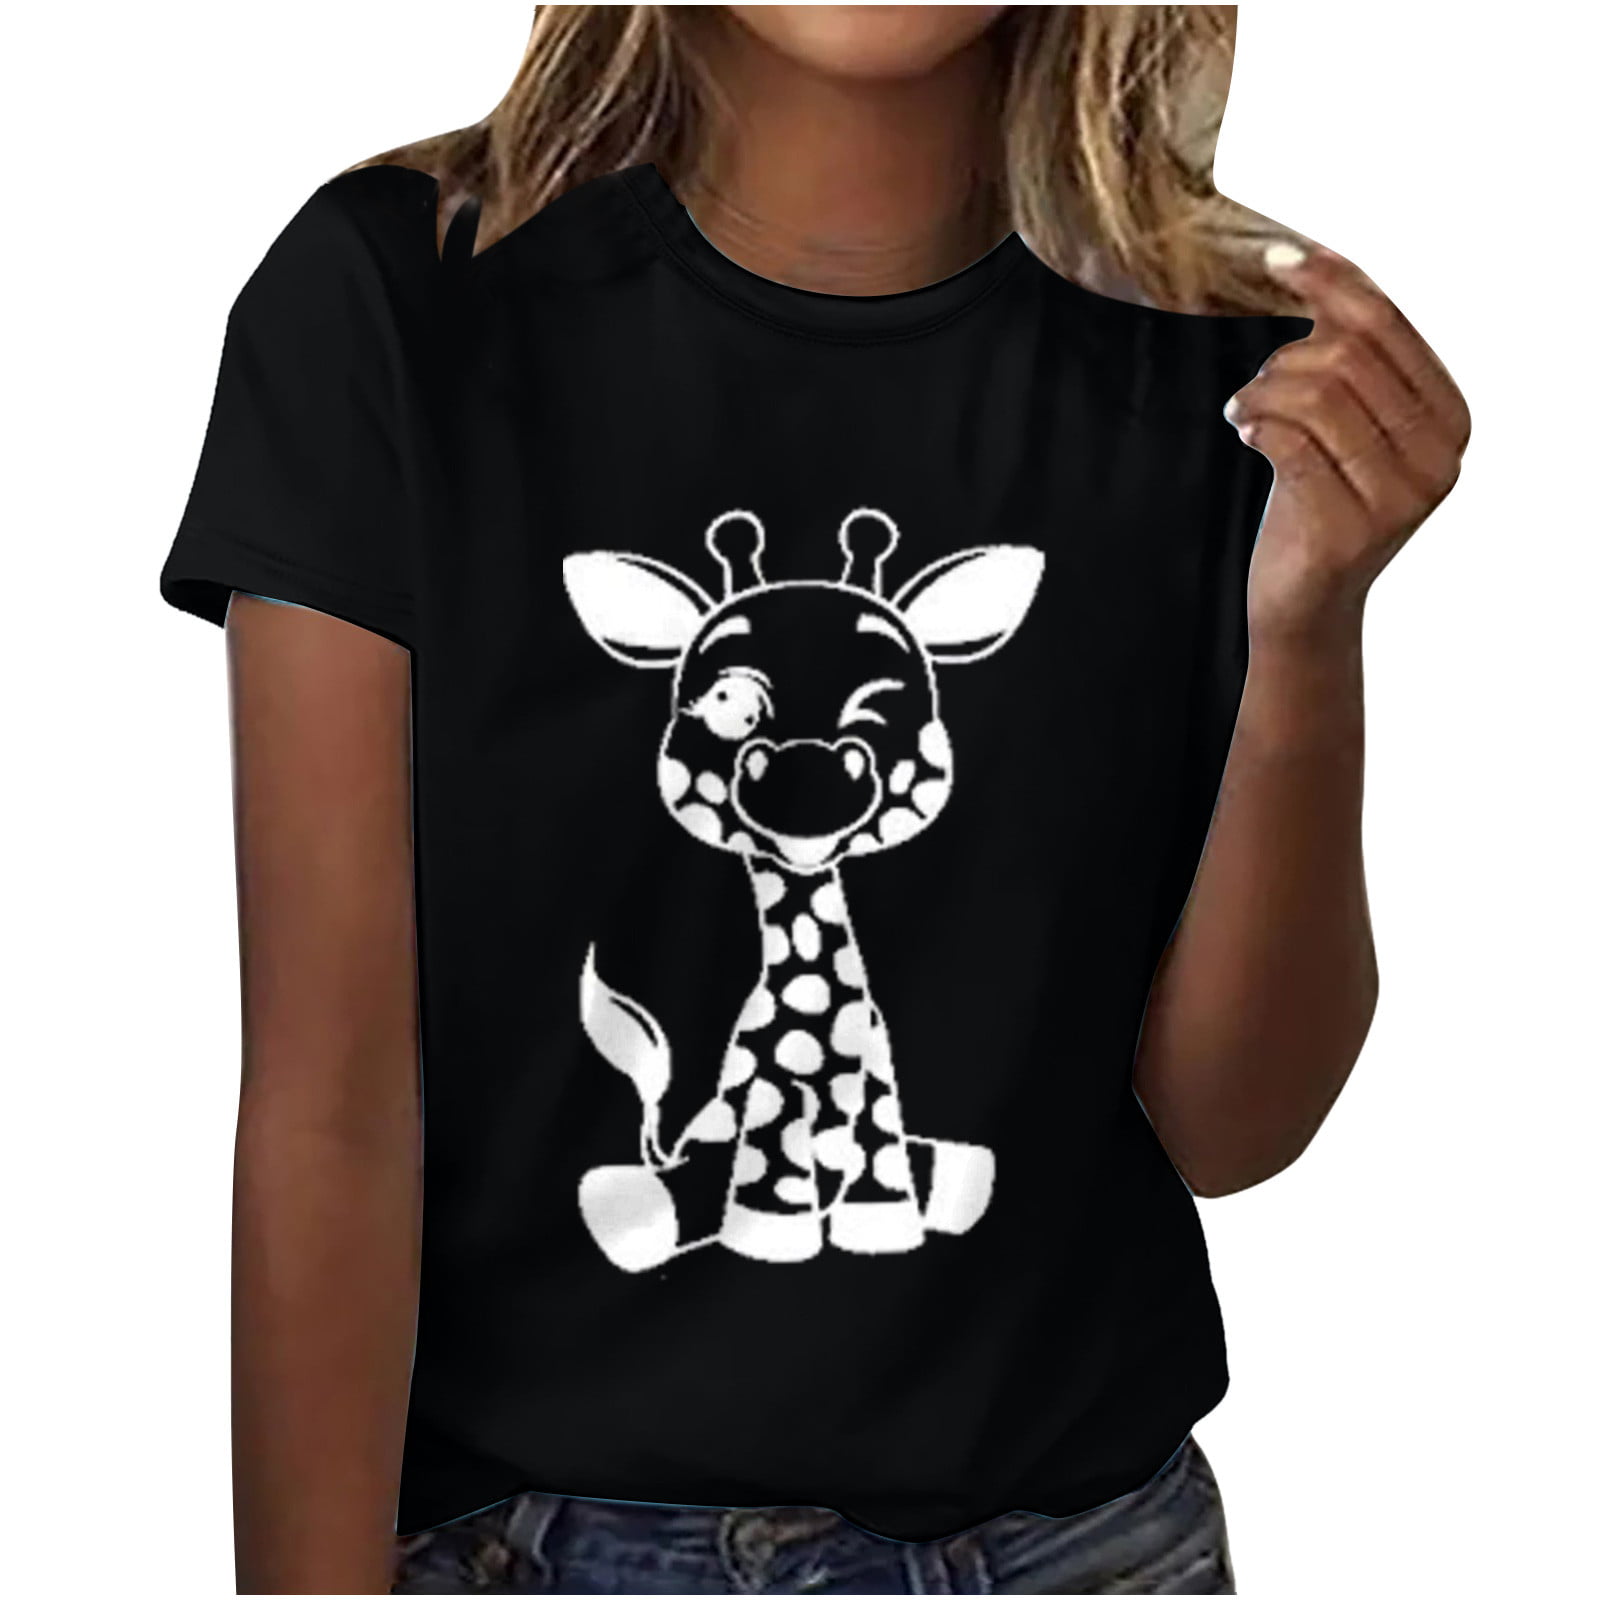 Giraffe Party T shirt for Women White with Animal Print Sleeves